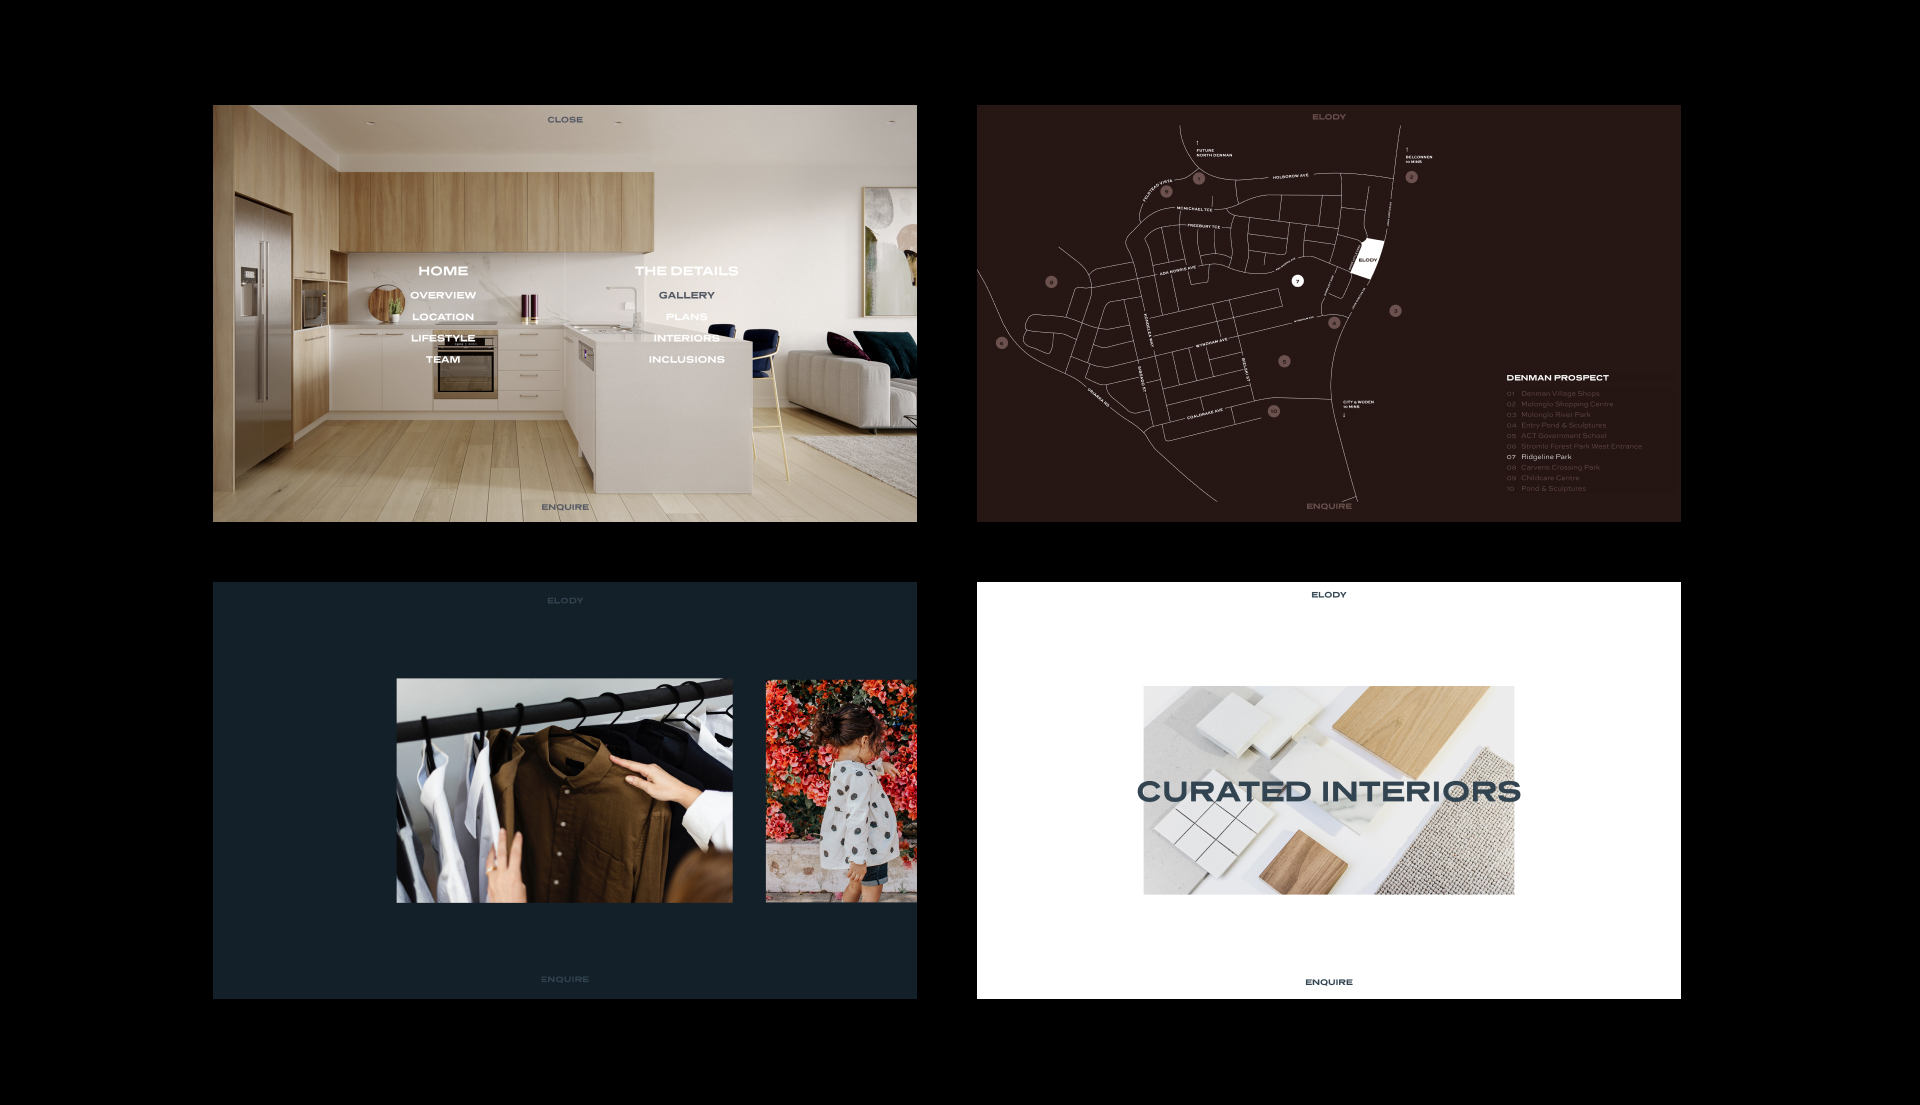 Flat designs of Elody website. Four images showing menu, interactive location map, photo gallery and Elody finishes/colour schemes.